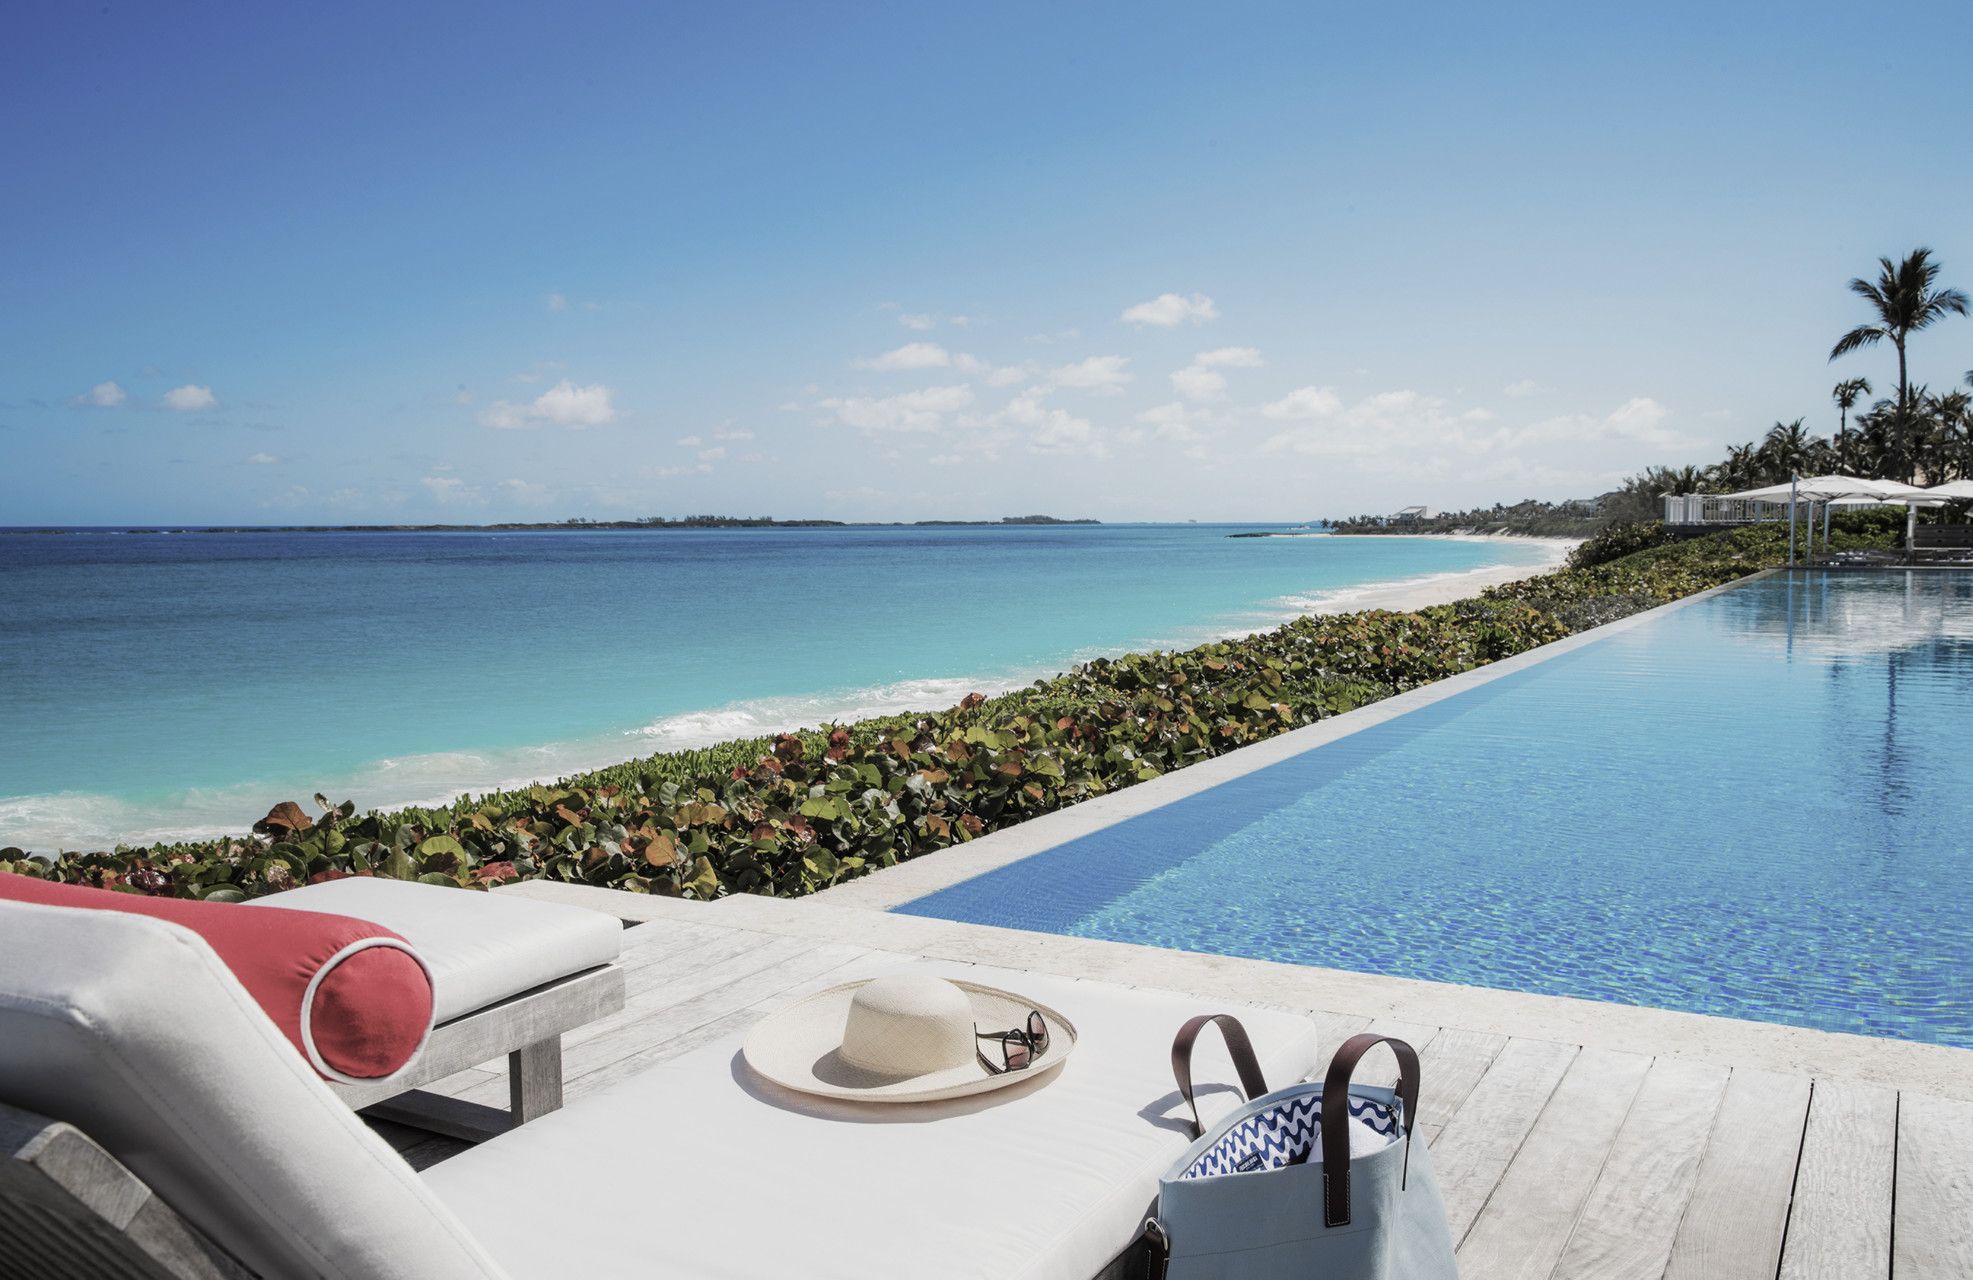 The Best Room At The Ocean Club Hotel - Luxury Hotels in the Bahamas